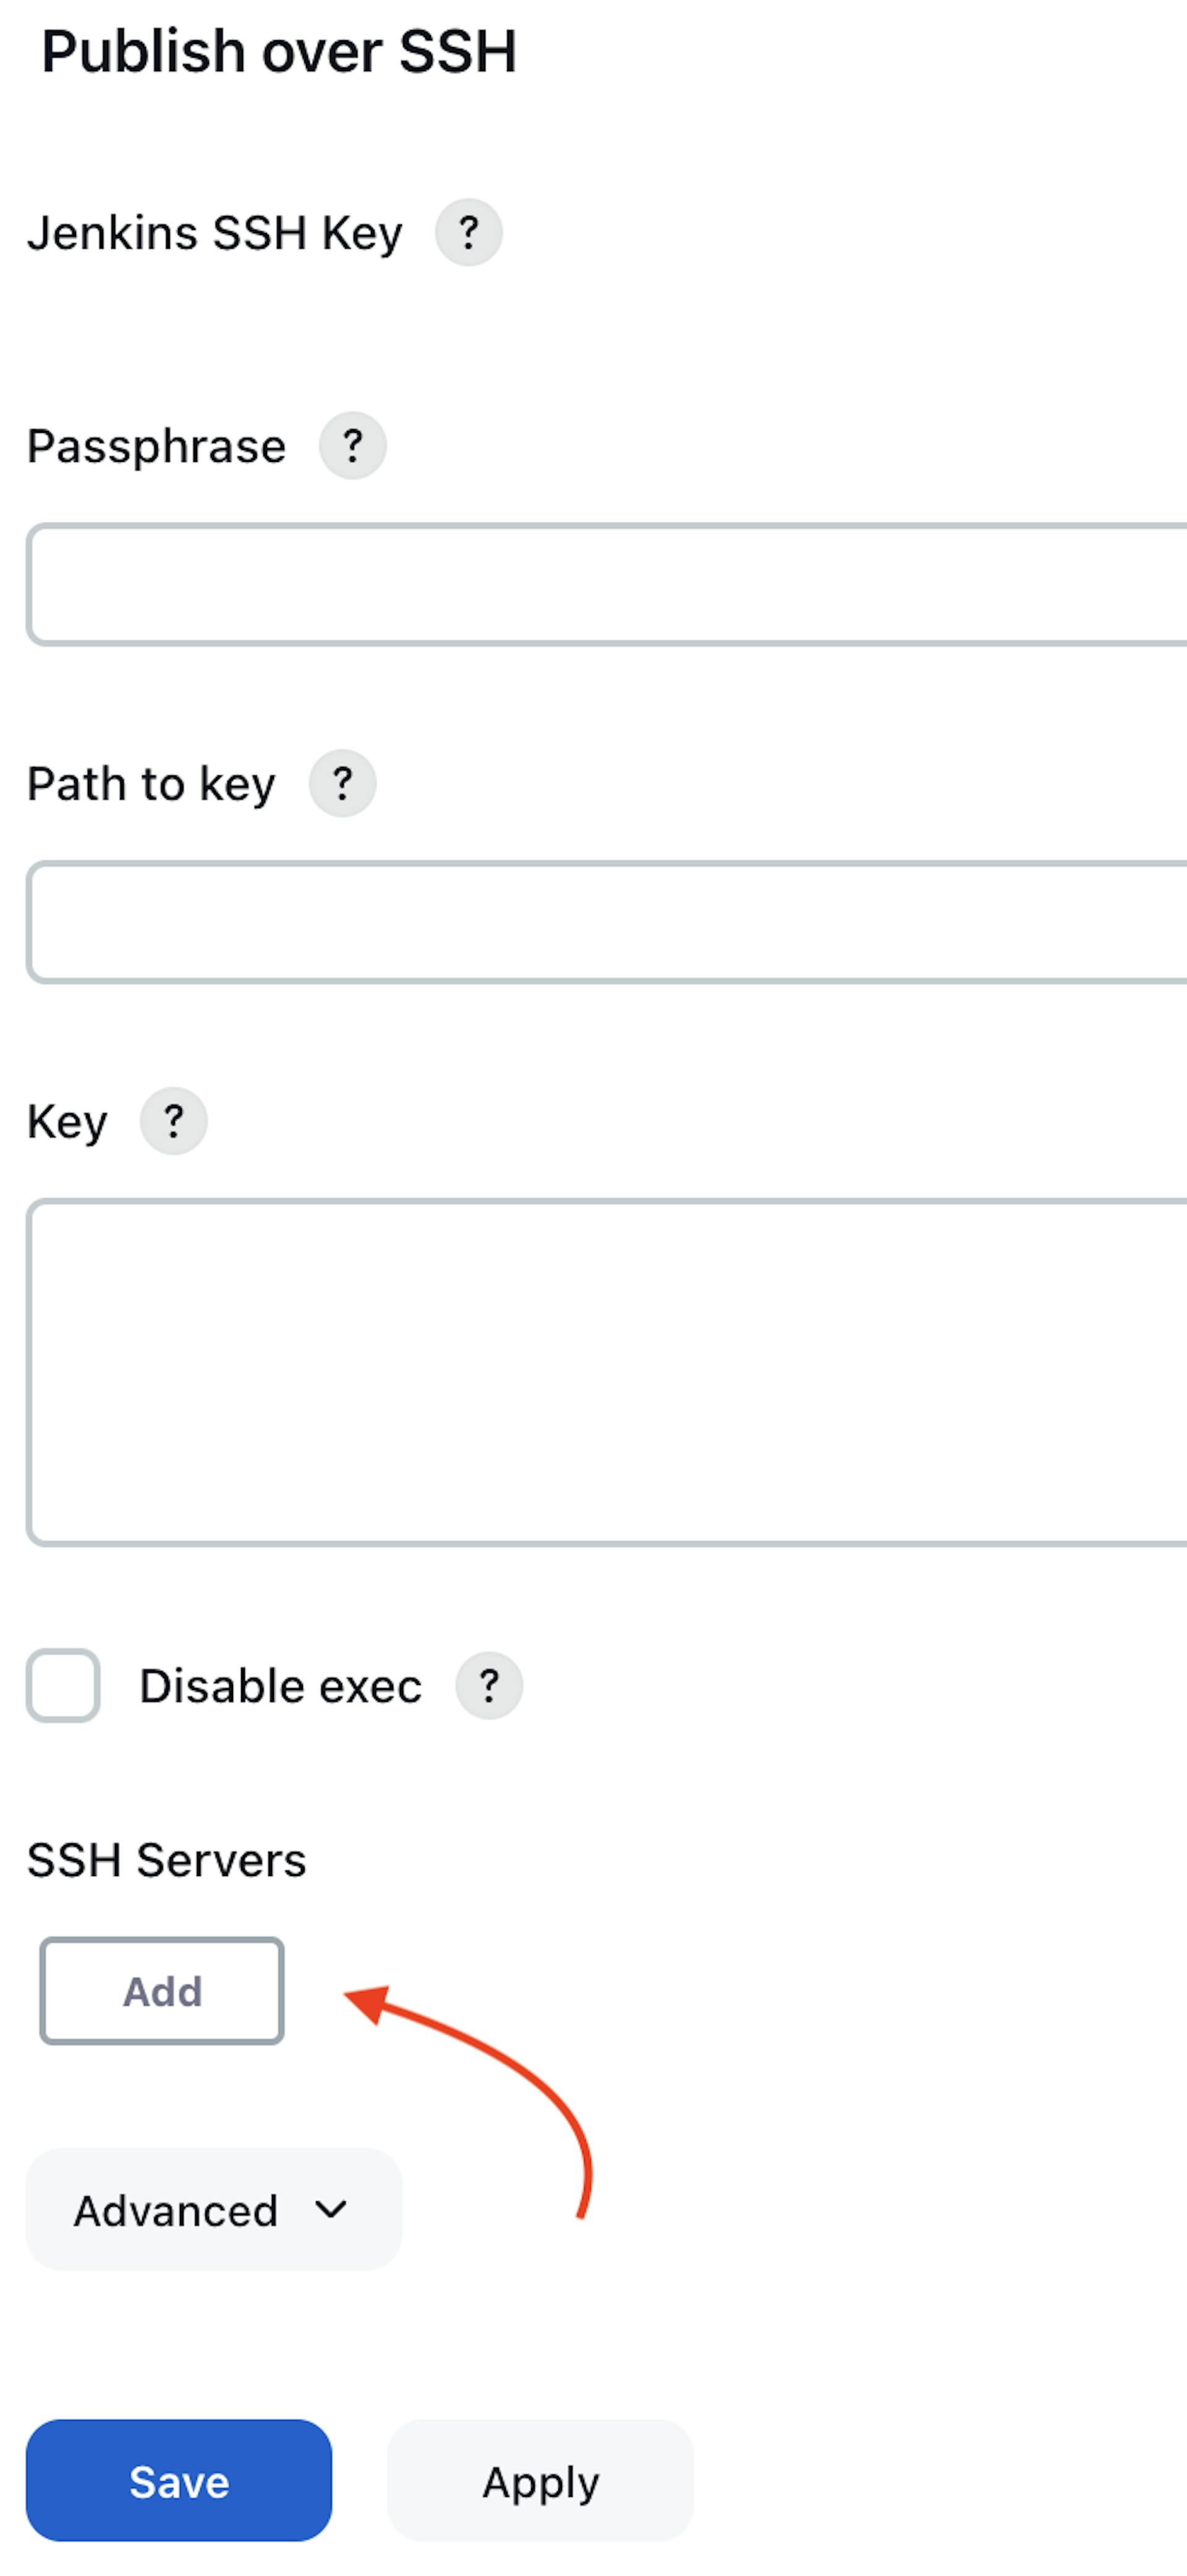 The screenshot of AWS EC2 Virtual Server instance terminal with the "Publish over SSH" plugin